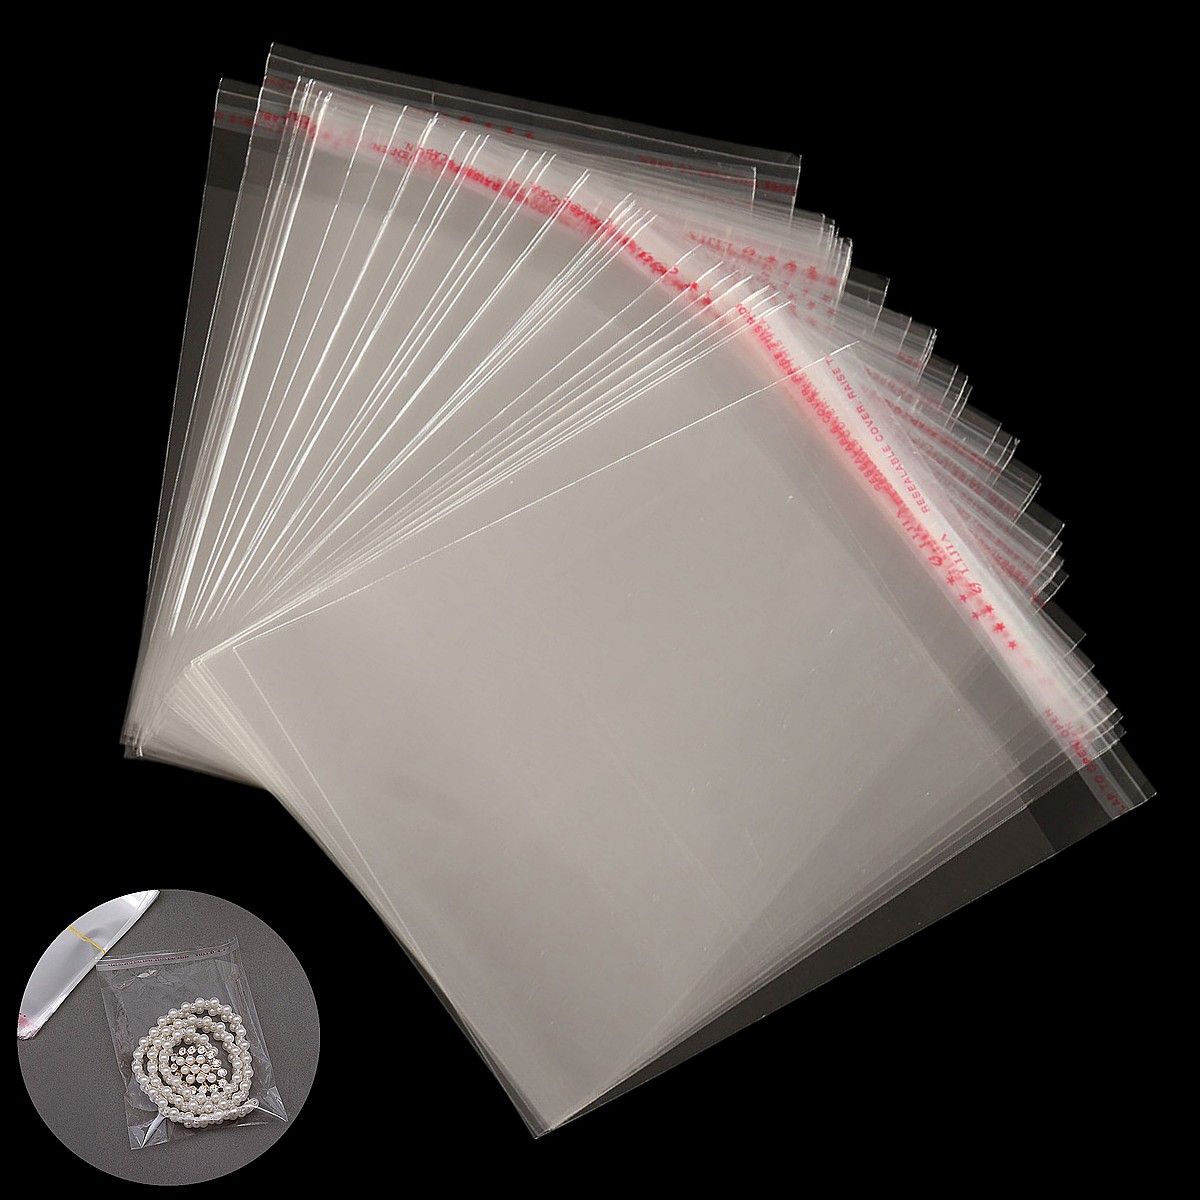 100pcs-12times16cm-Clear-Cellophane-Display-Bags-Self-Adhesive-Seal-Plastic--For-Card-1039191